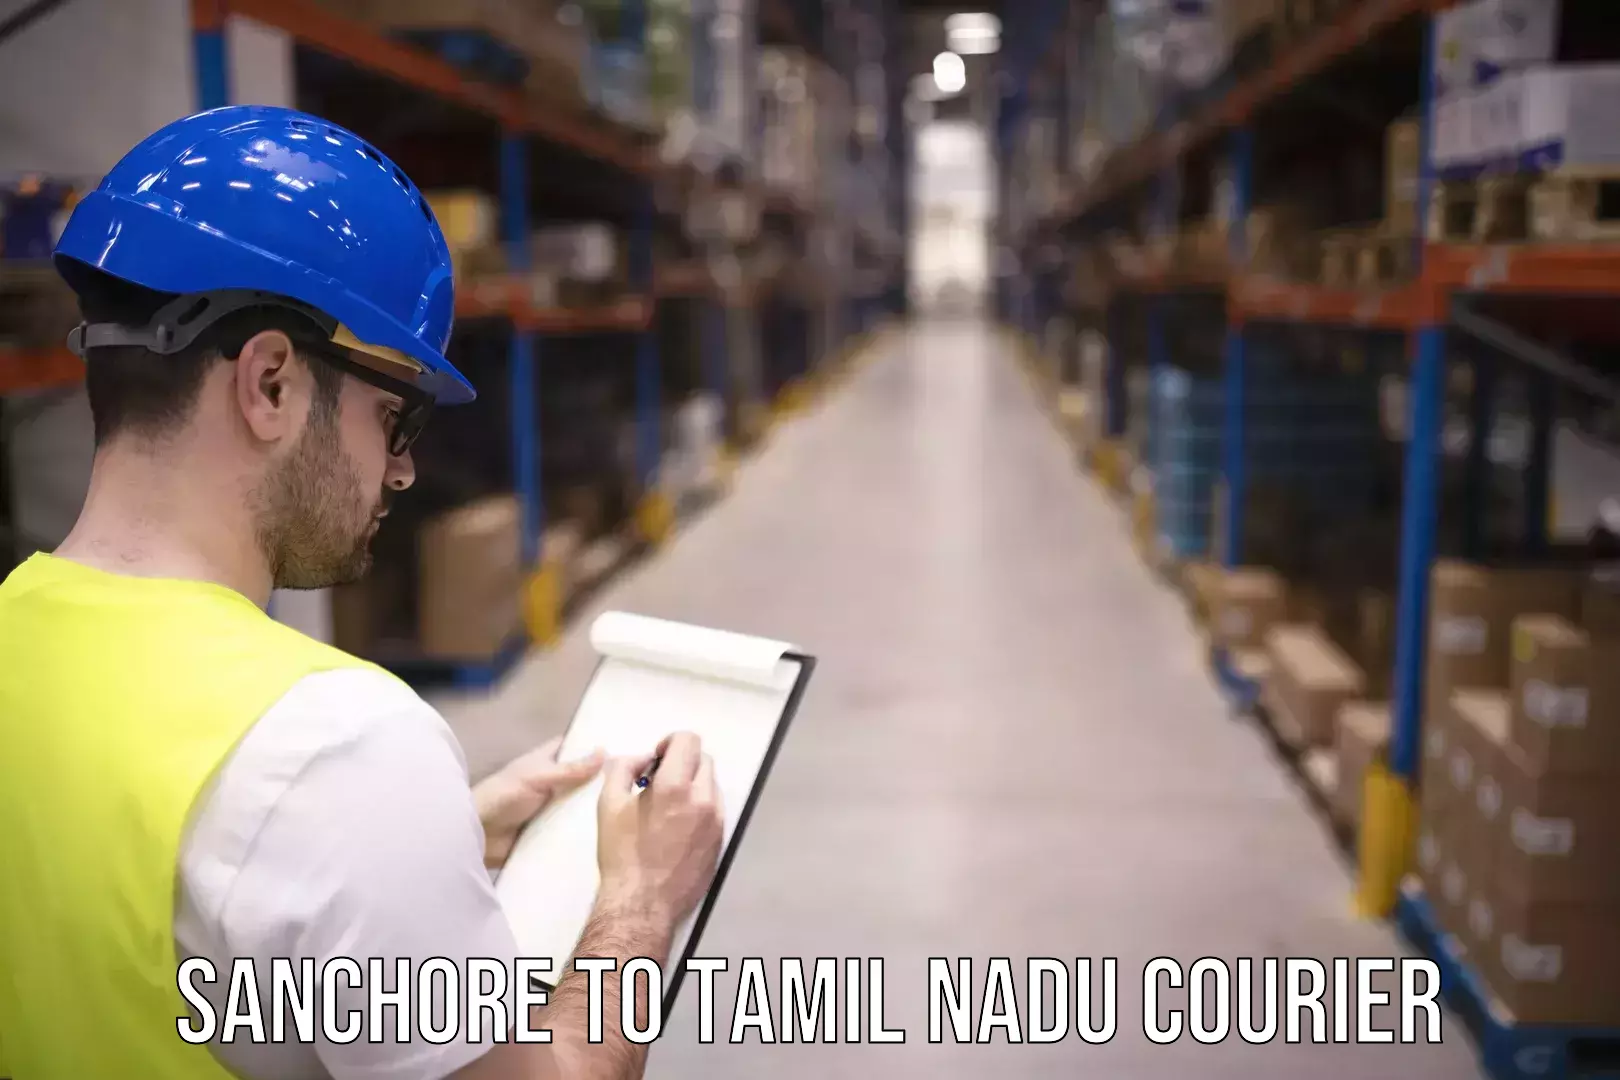 Next-day delivery options Sanchore to Tamil Nadu